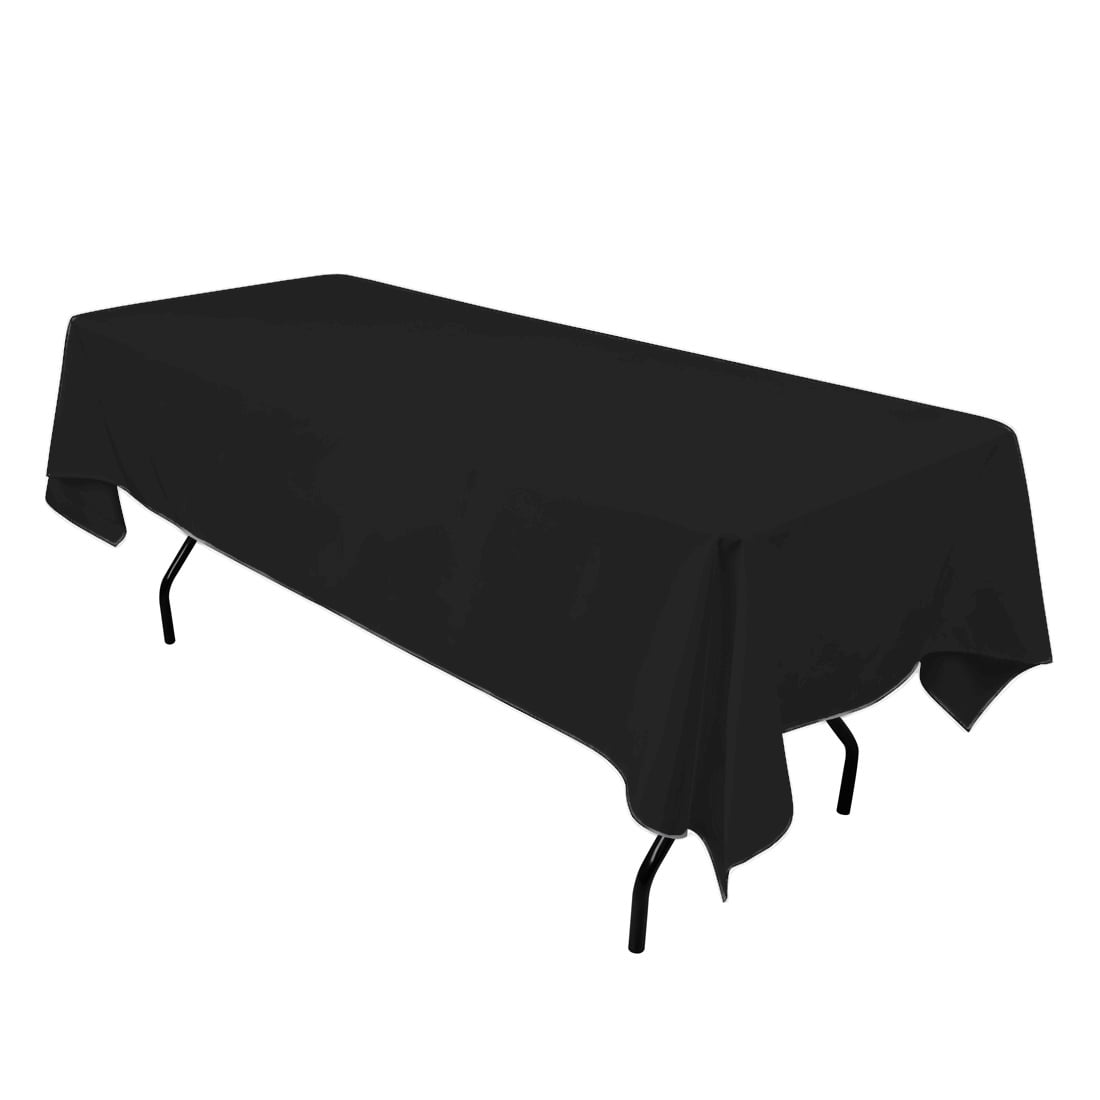 LinenTablecloth 6 ft Fitted Polyester Tablecloth Black 6FTTD-010111